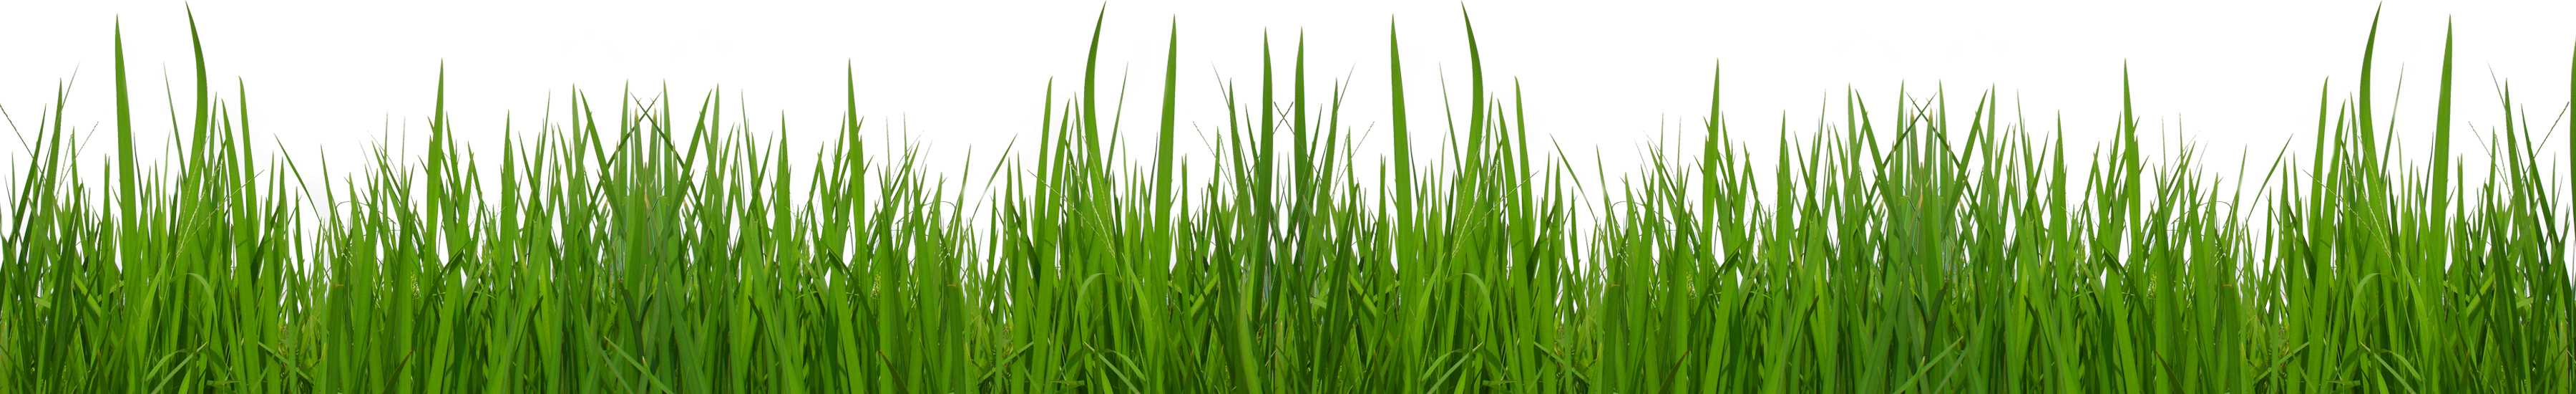 Grass and flowers clip art free clipart images clipartcow